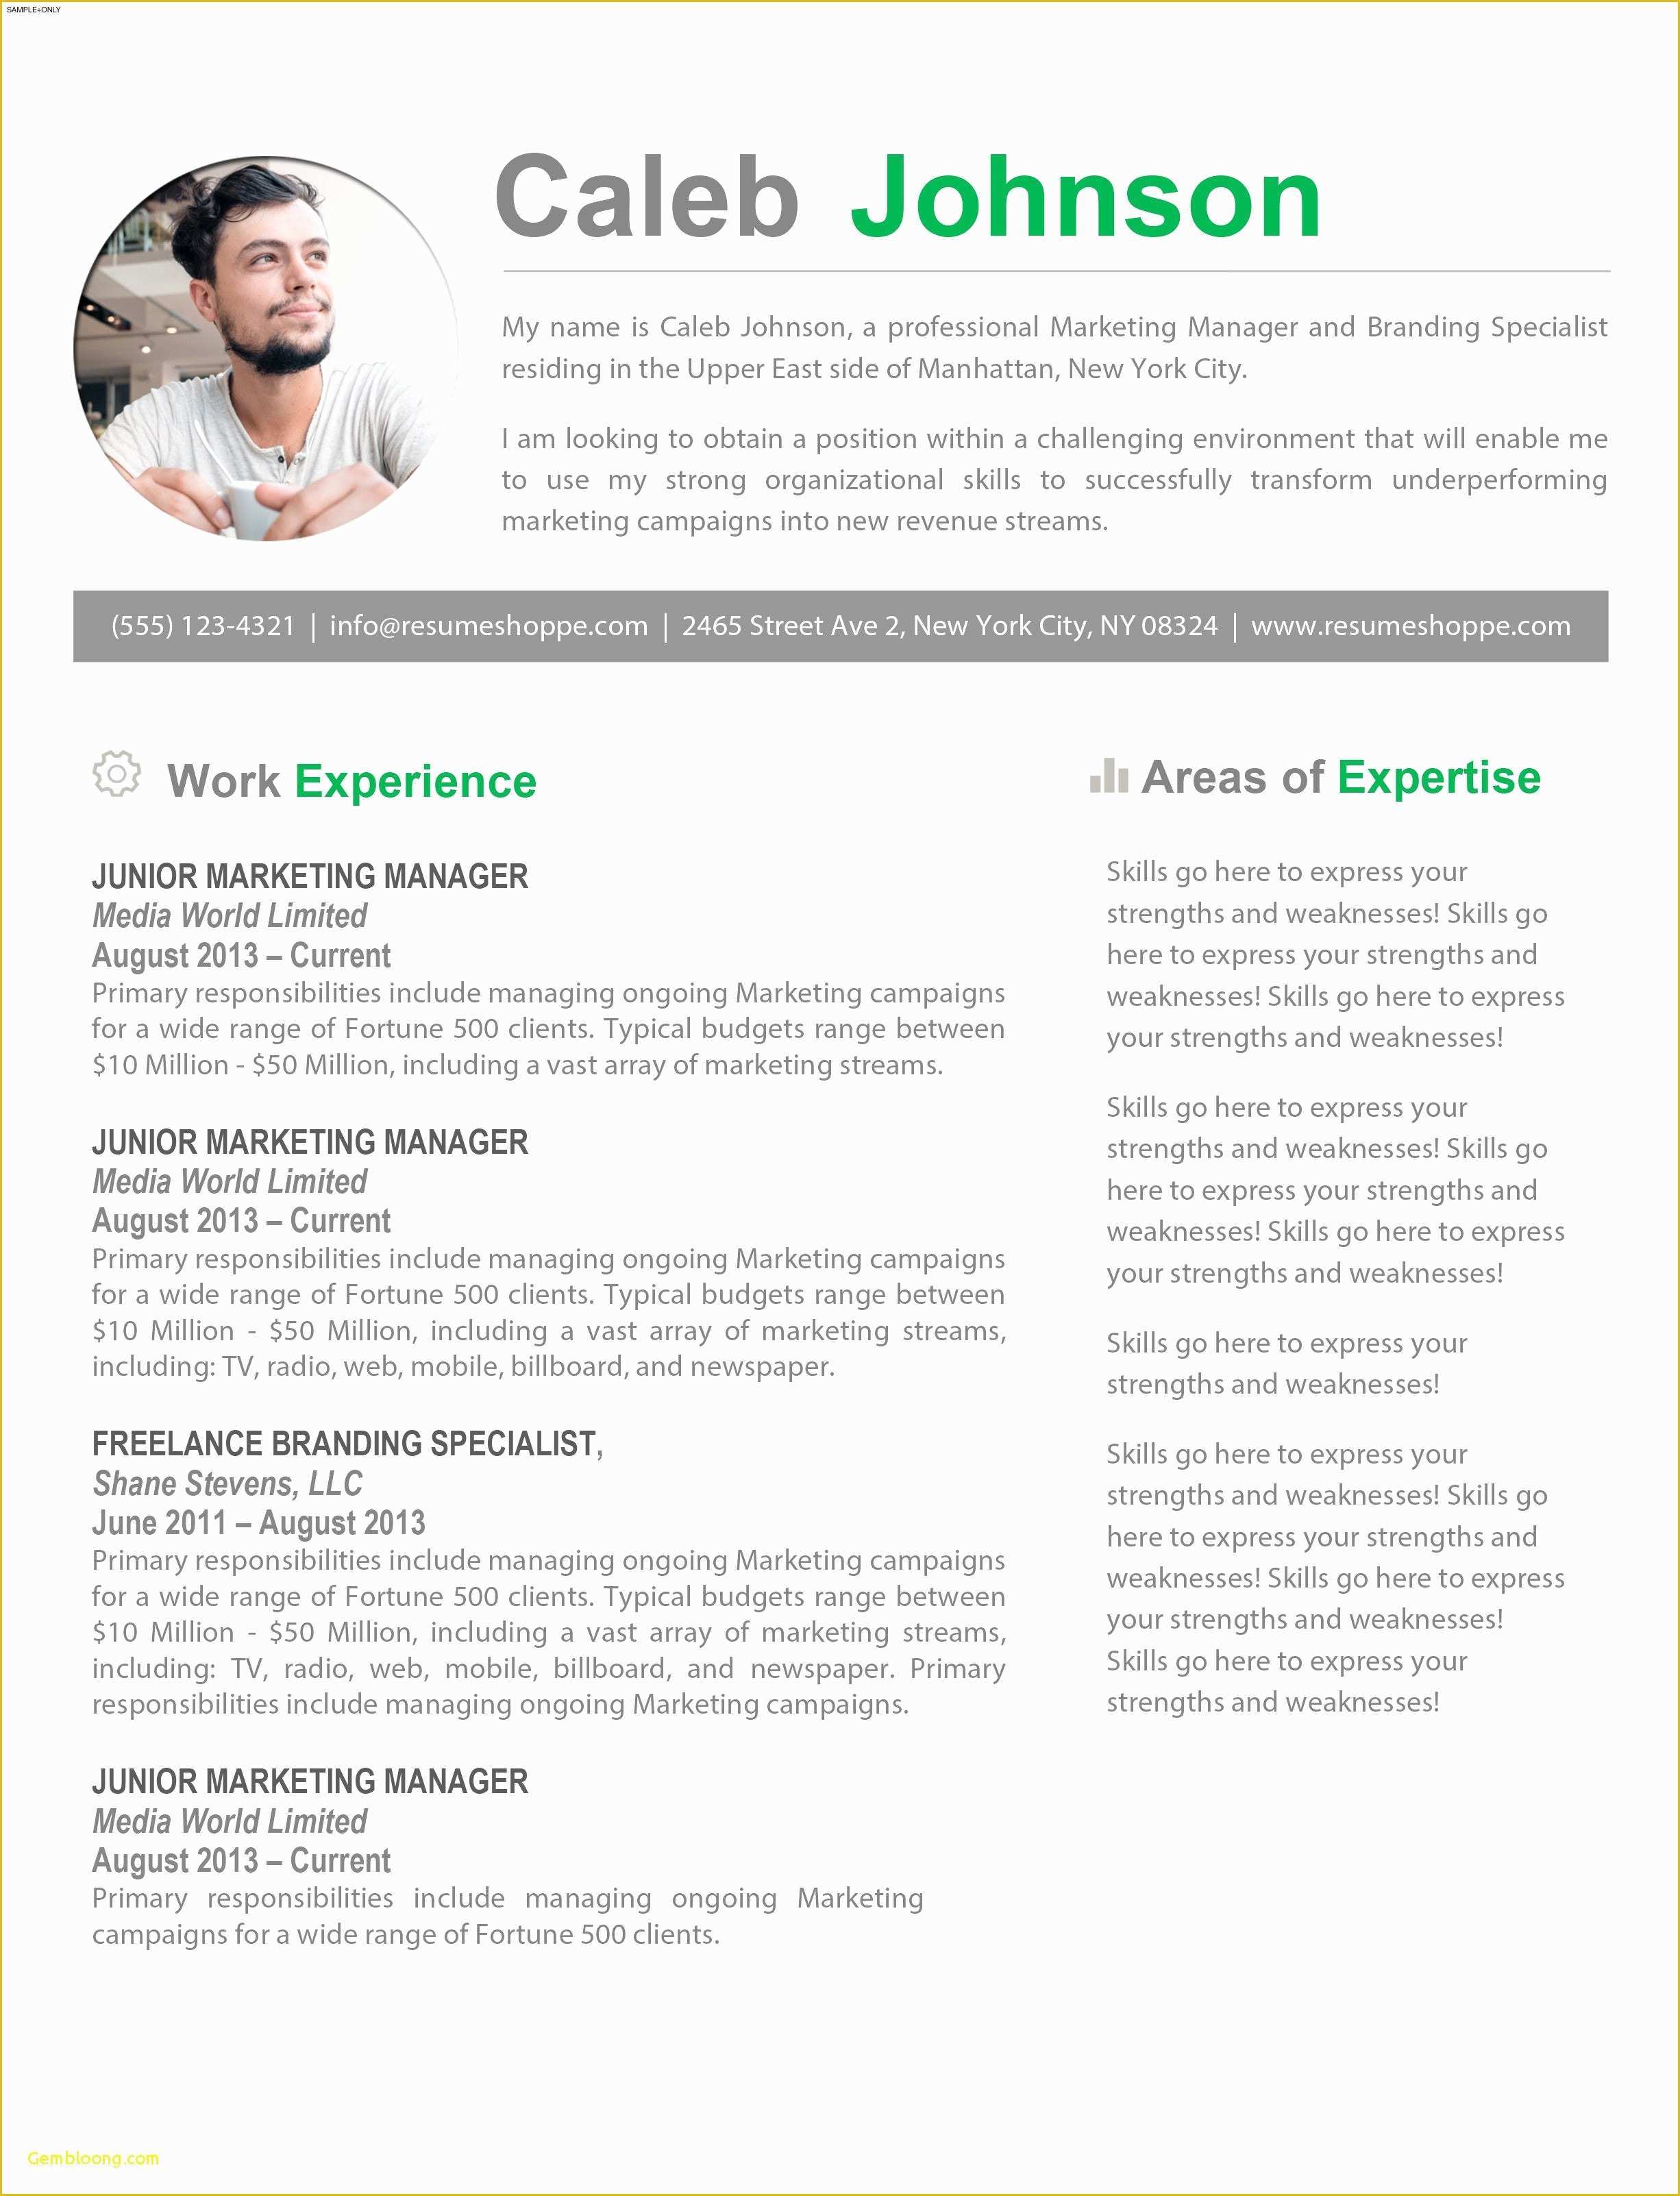 Mac Pages Templates Free Download Of Apple Pages Resume Template Elegant Unusual Word for Mac